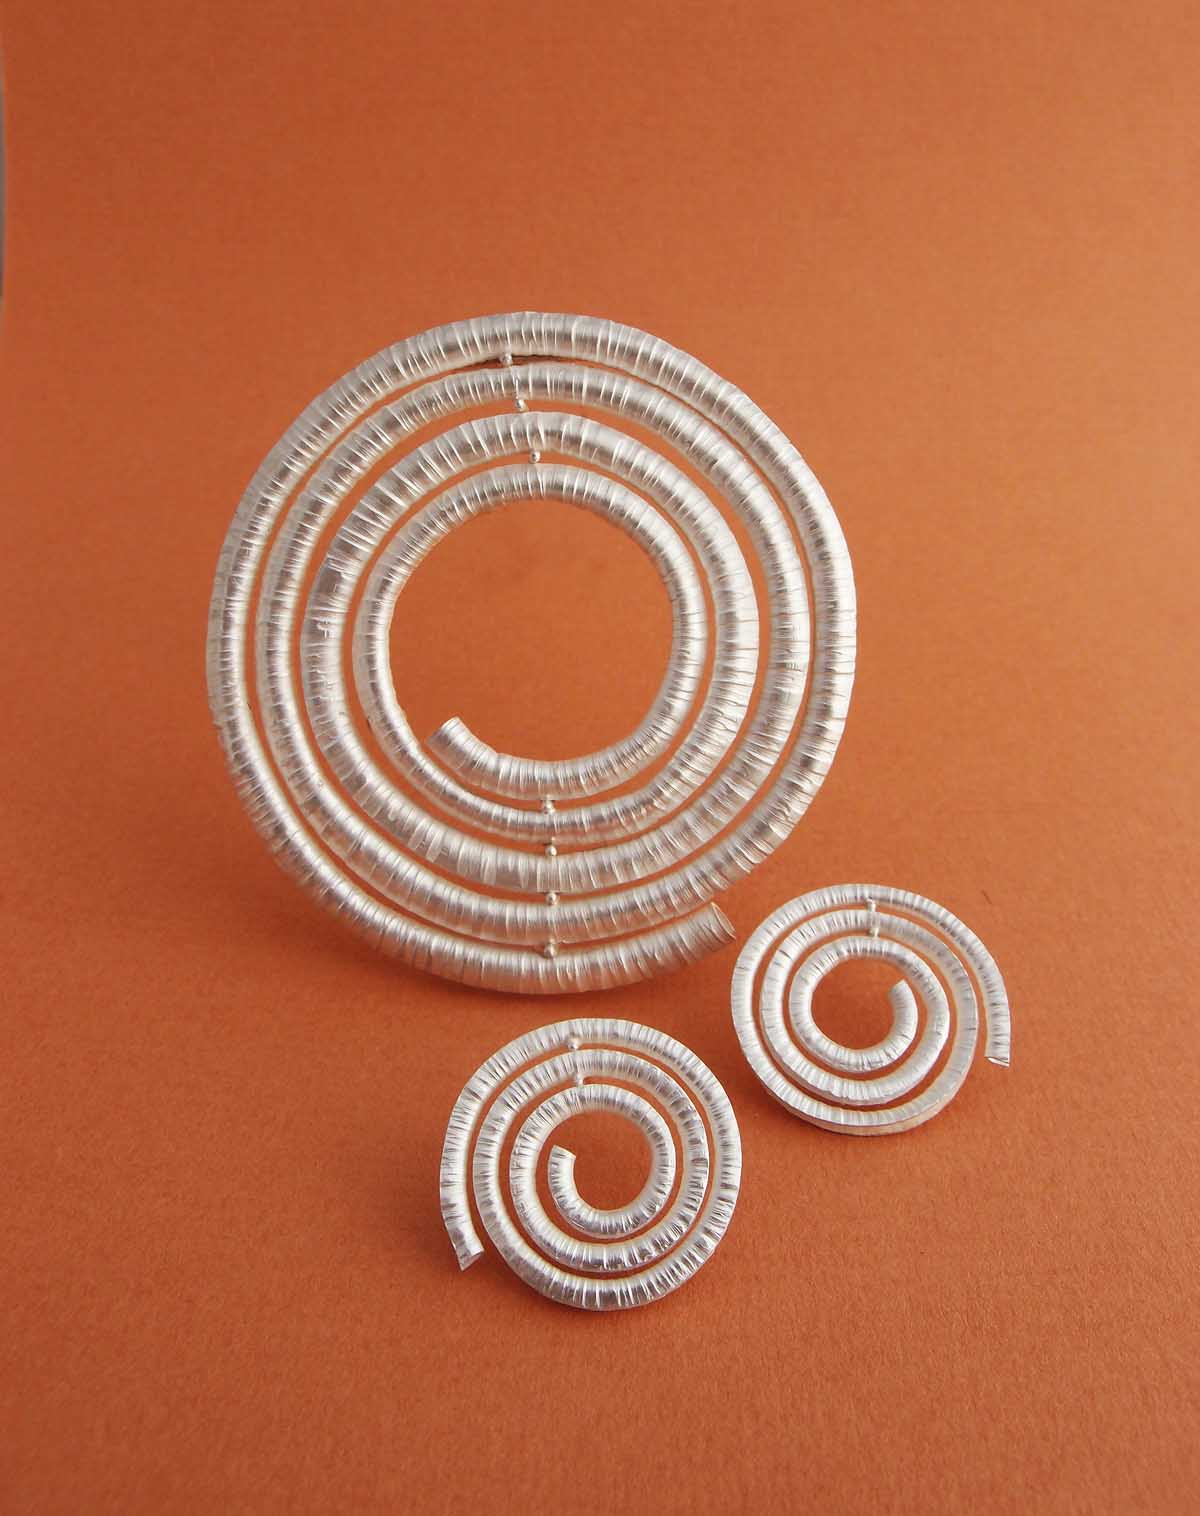 Silver spiral brooch and earrings